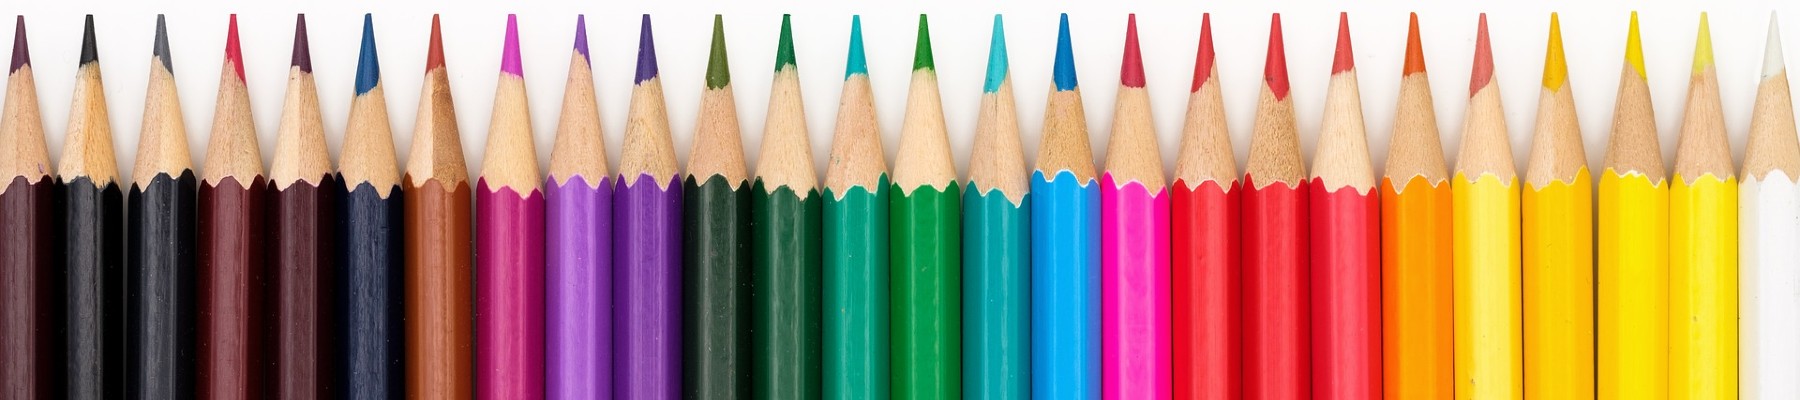 Colored pencils lined up left to right.